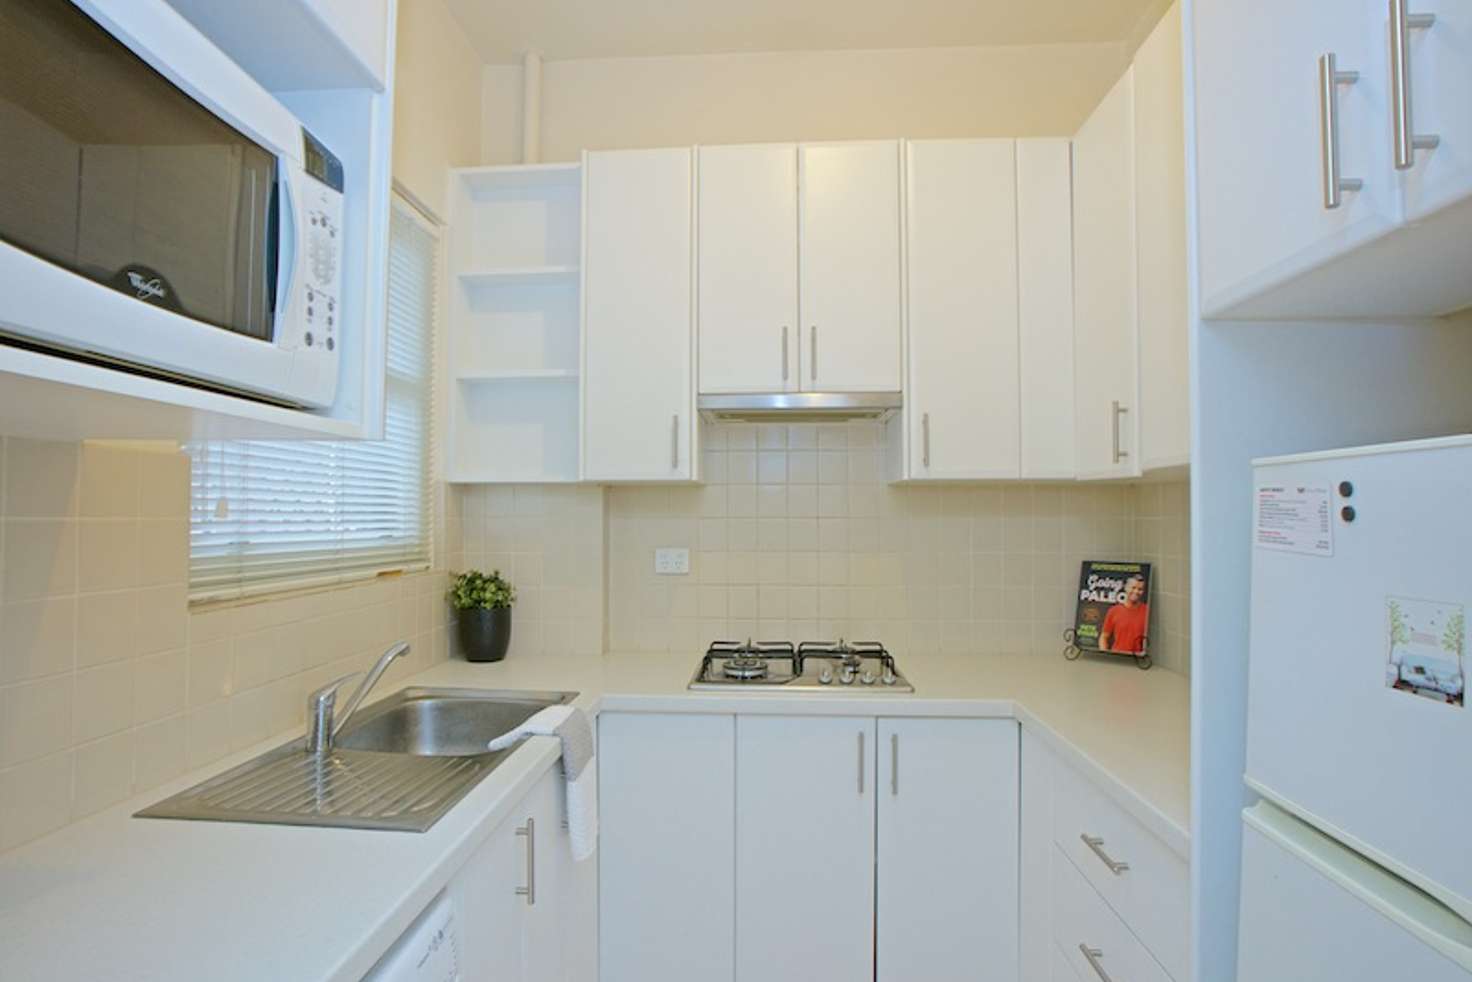 Main view of Homely apartment listing, 101/45 Malcolm St, West Perth WA 6005